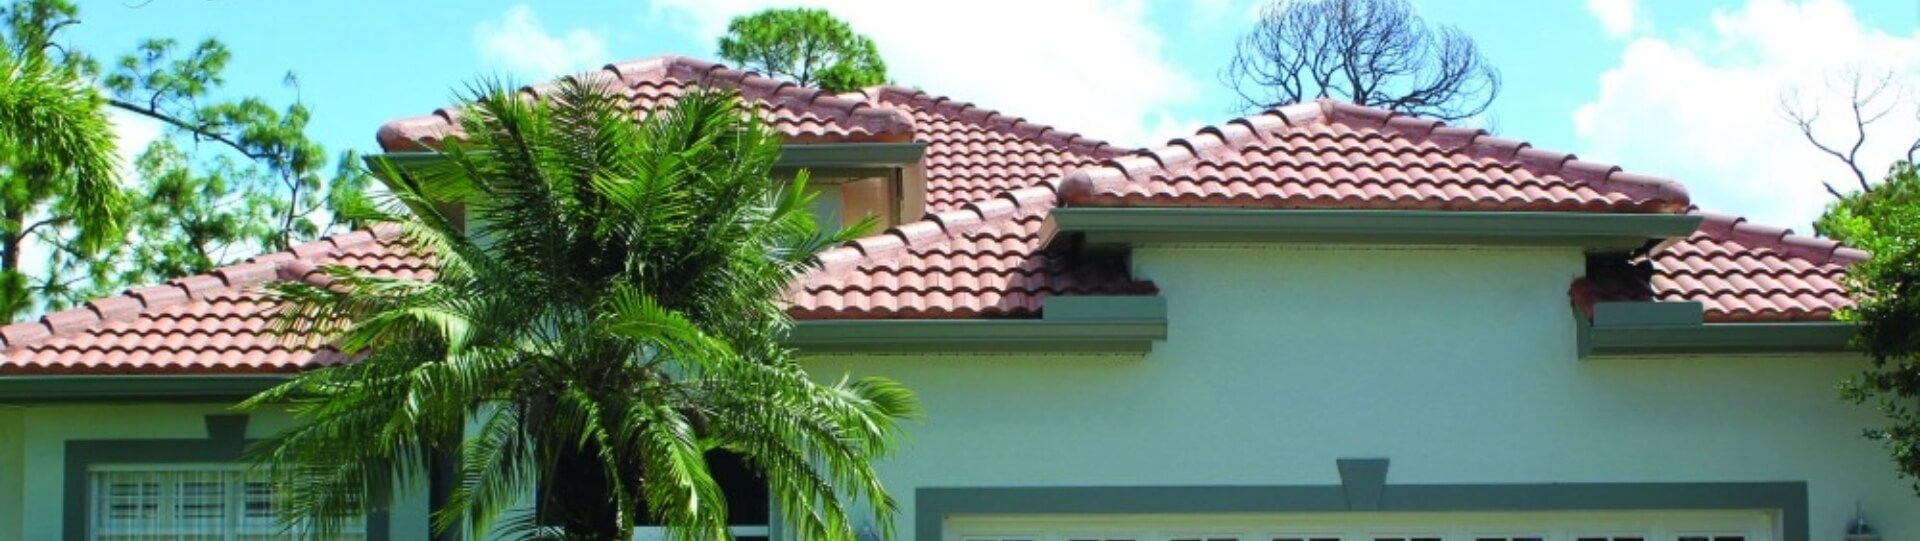 Tile Roof installed by Cathedral Roofing